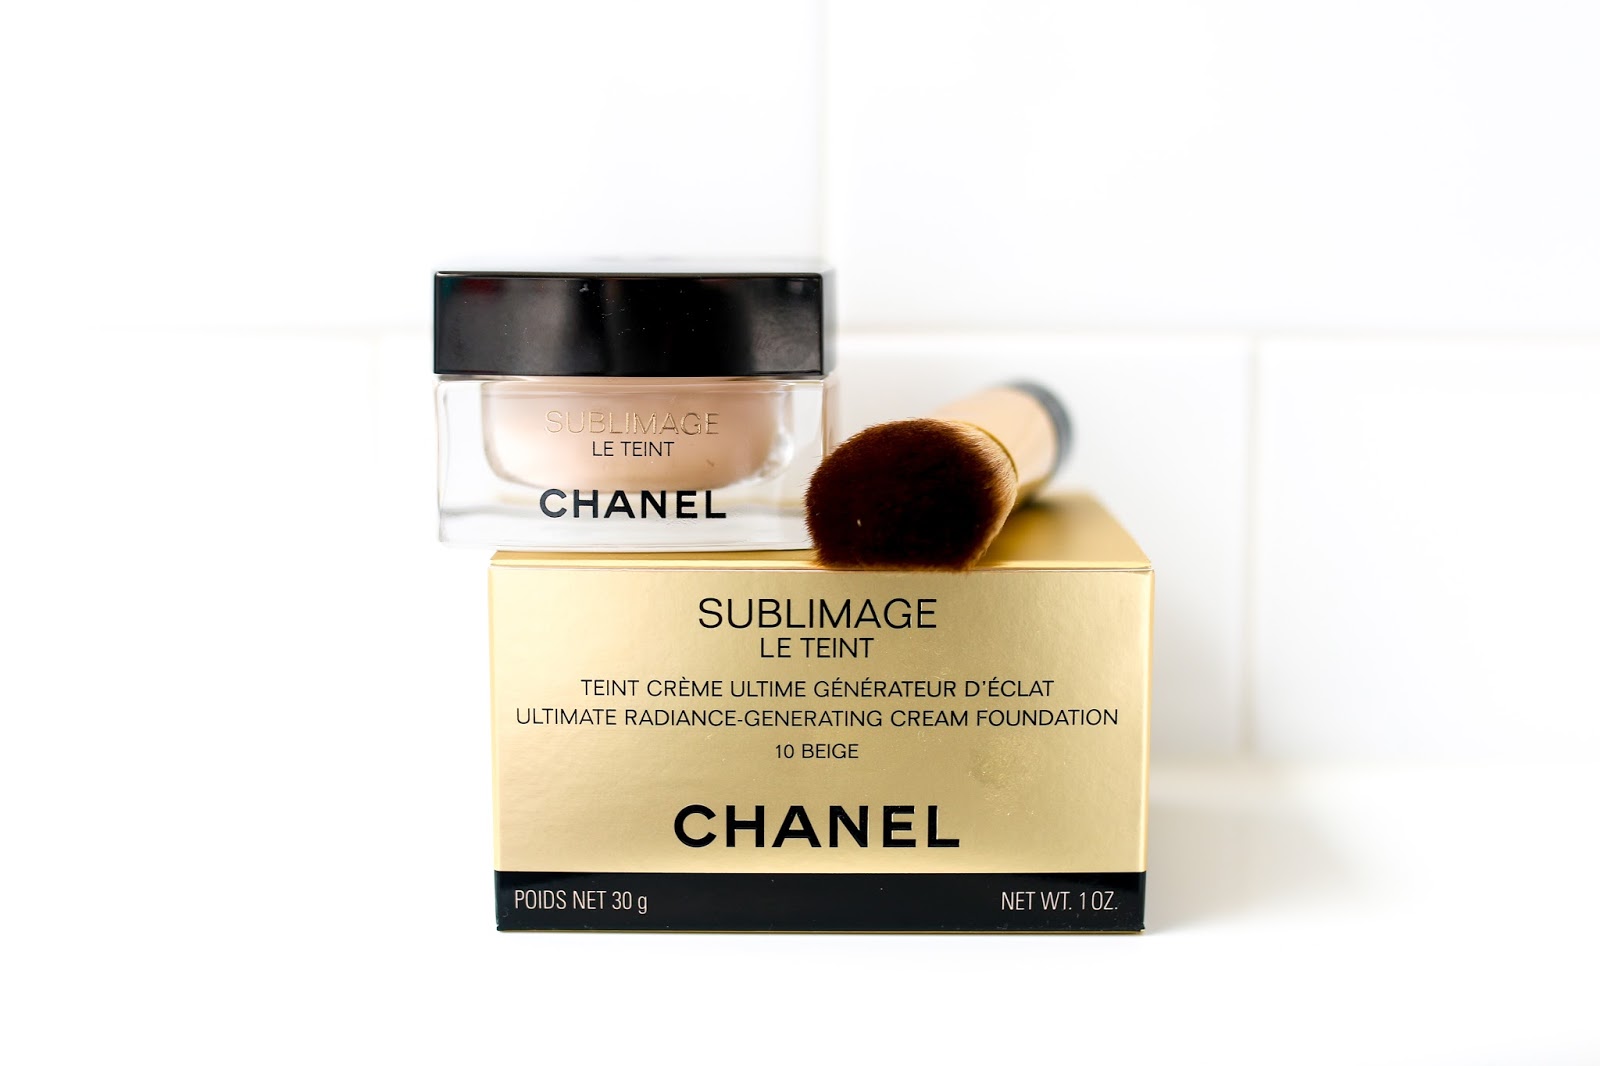 Review and Demo: Chanel Sublimage Le Teint Cream Foundation - alittlebitetc